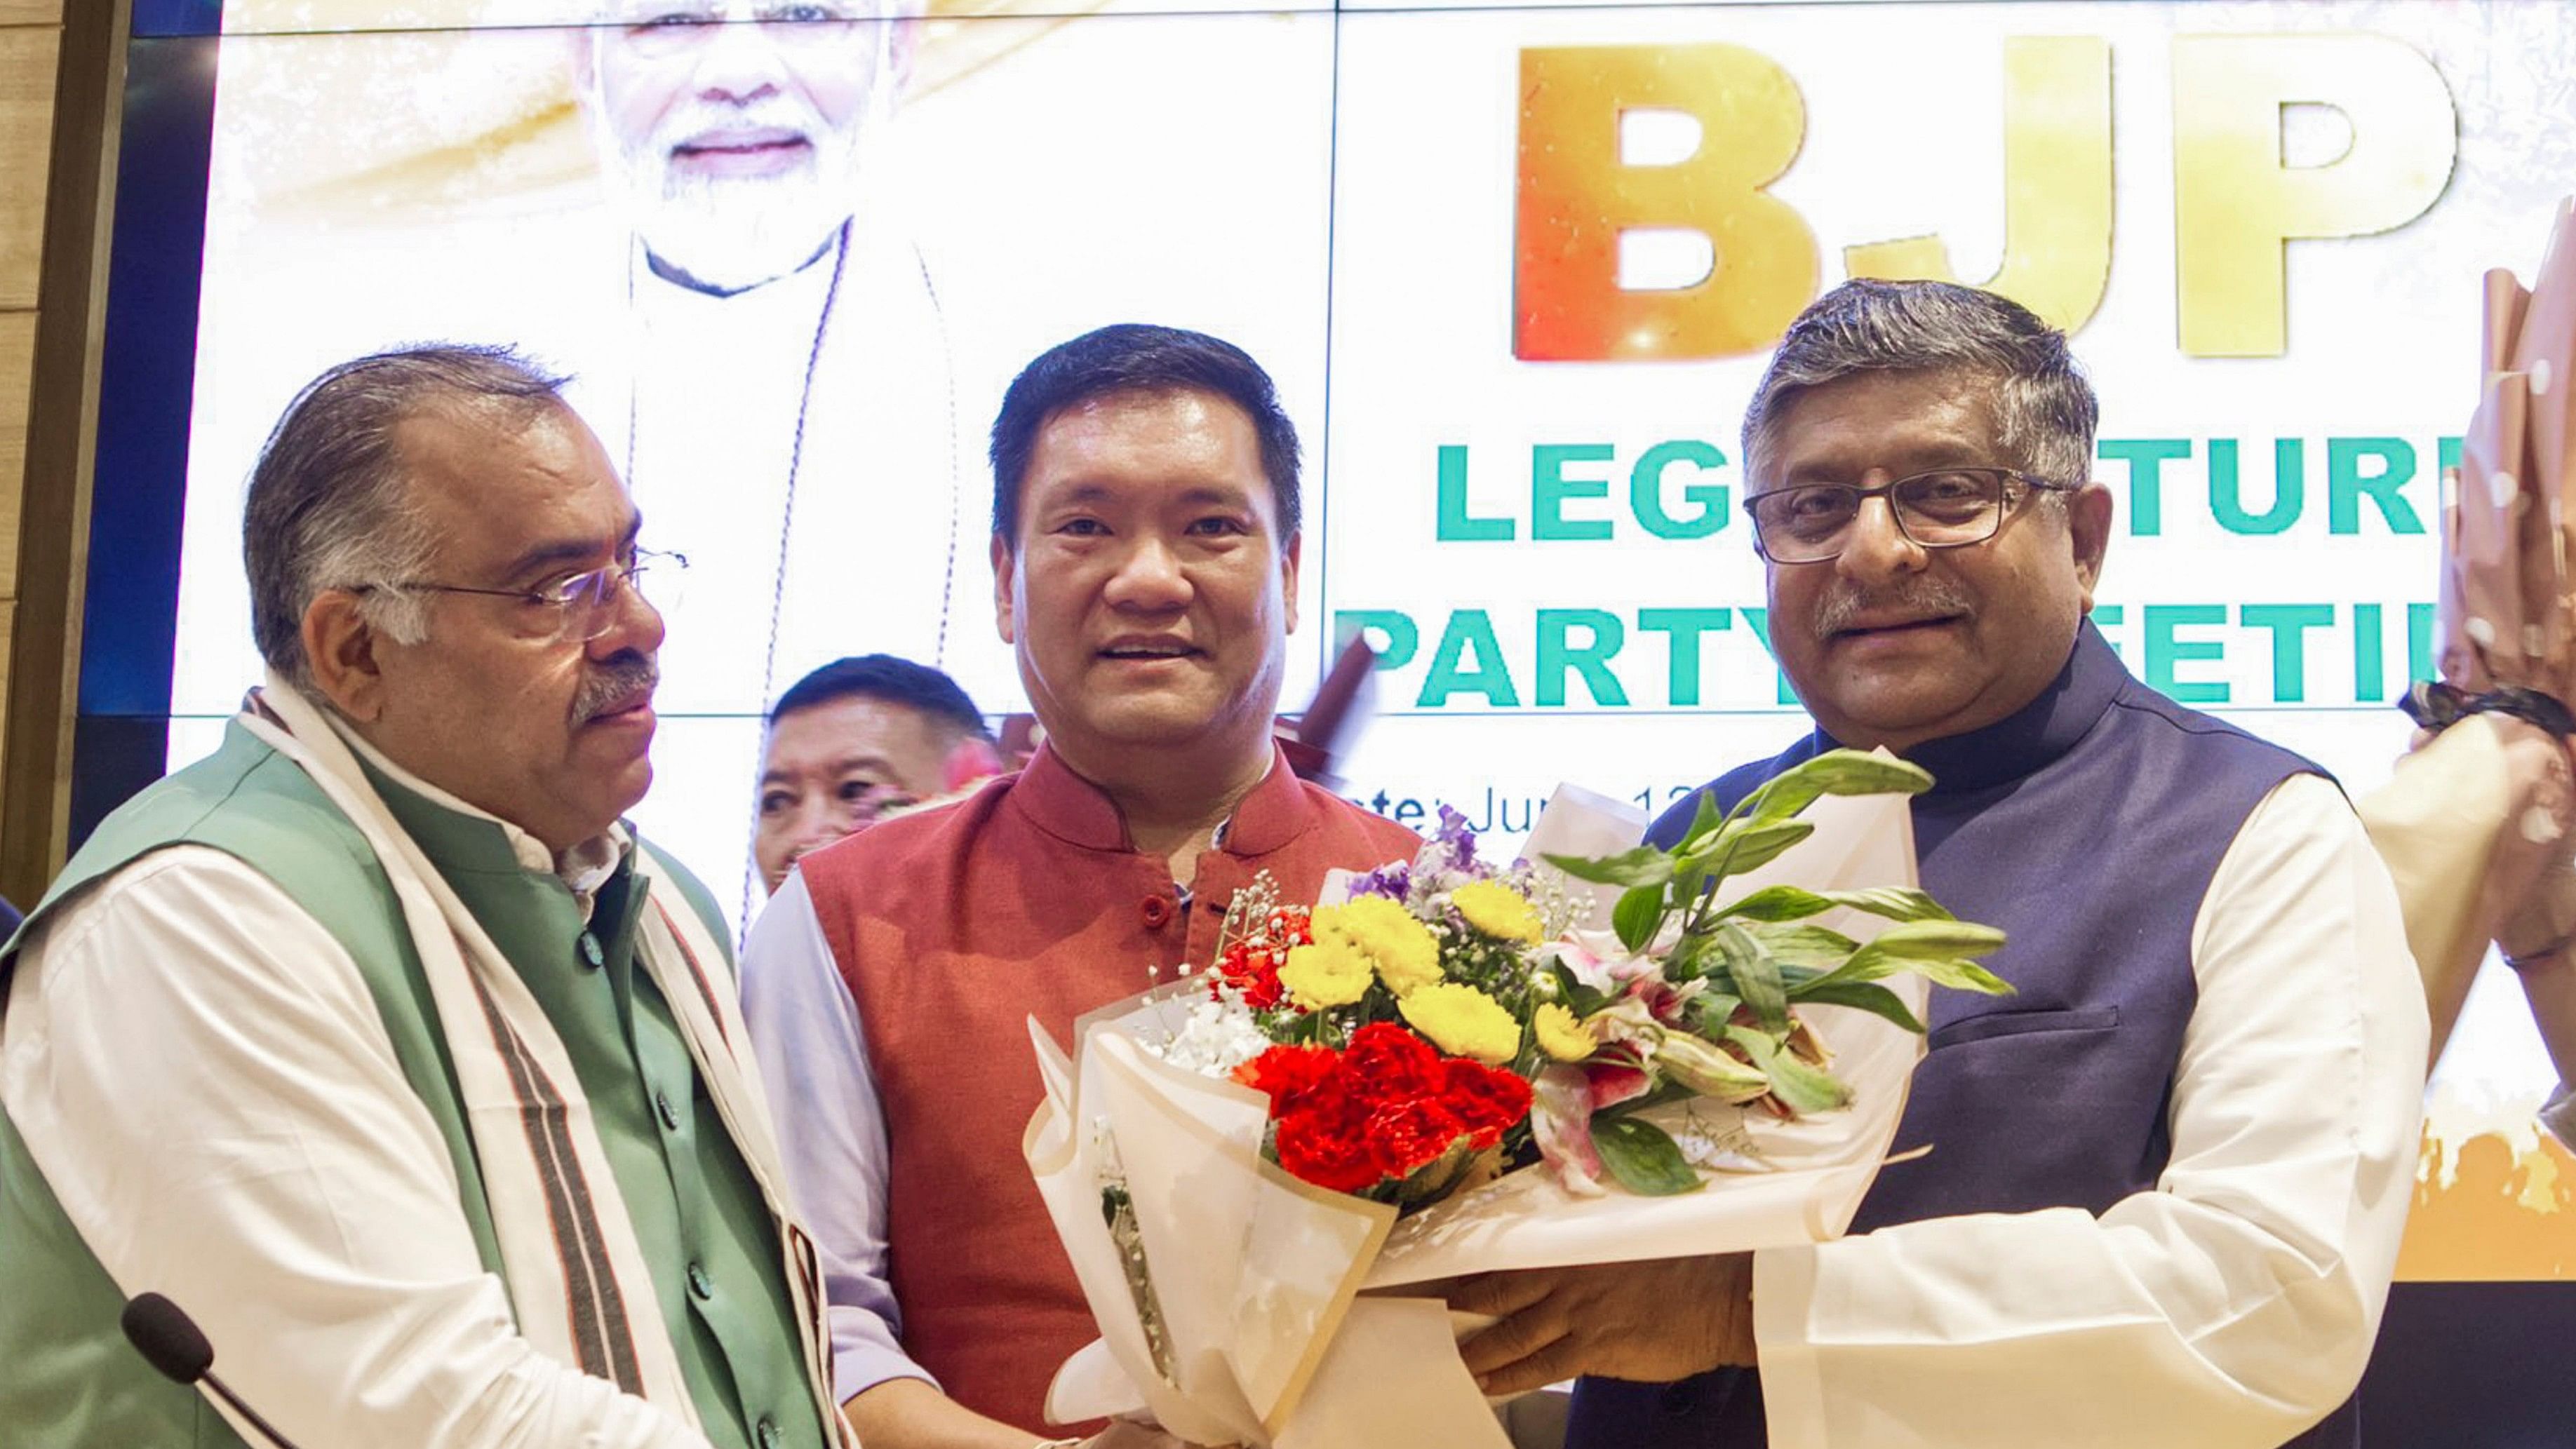 <div class="paragraphs"><p>BJP MP Ravi Shankar Prasad felicitates party MLA Pema Khandu after the latter was elected as the leader of the Legislature Party of Arunachal Pradesh and CM-designate of the state</p></div>